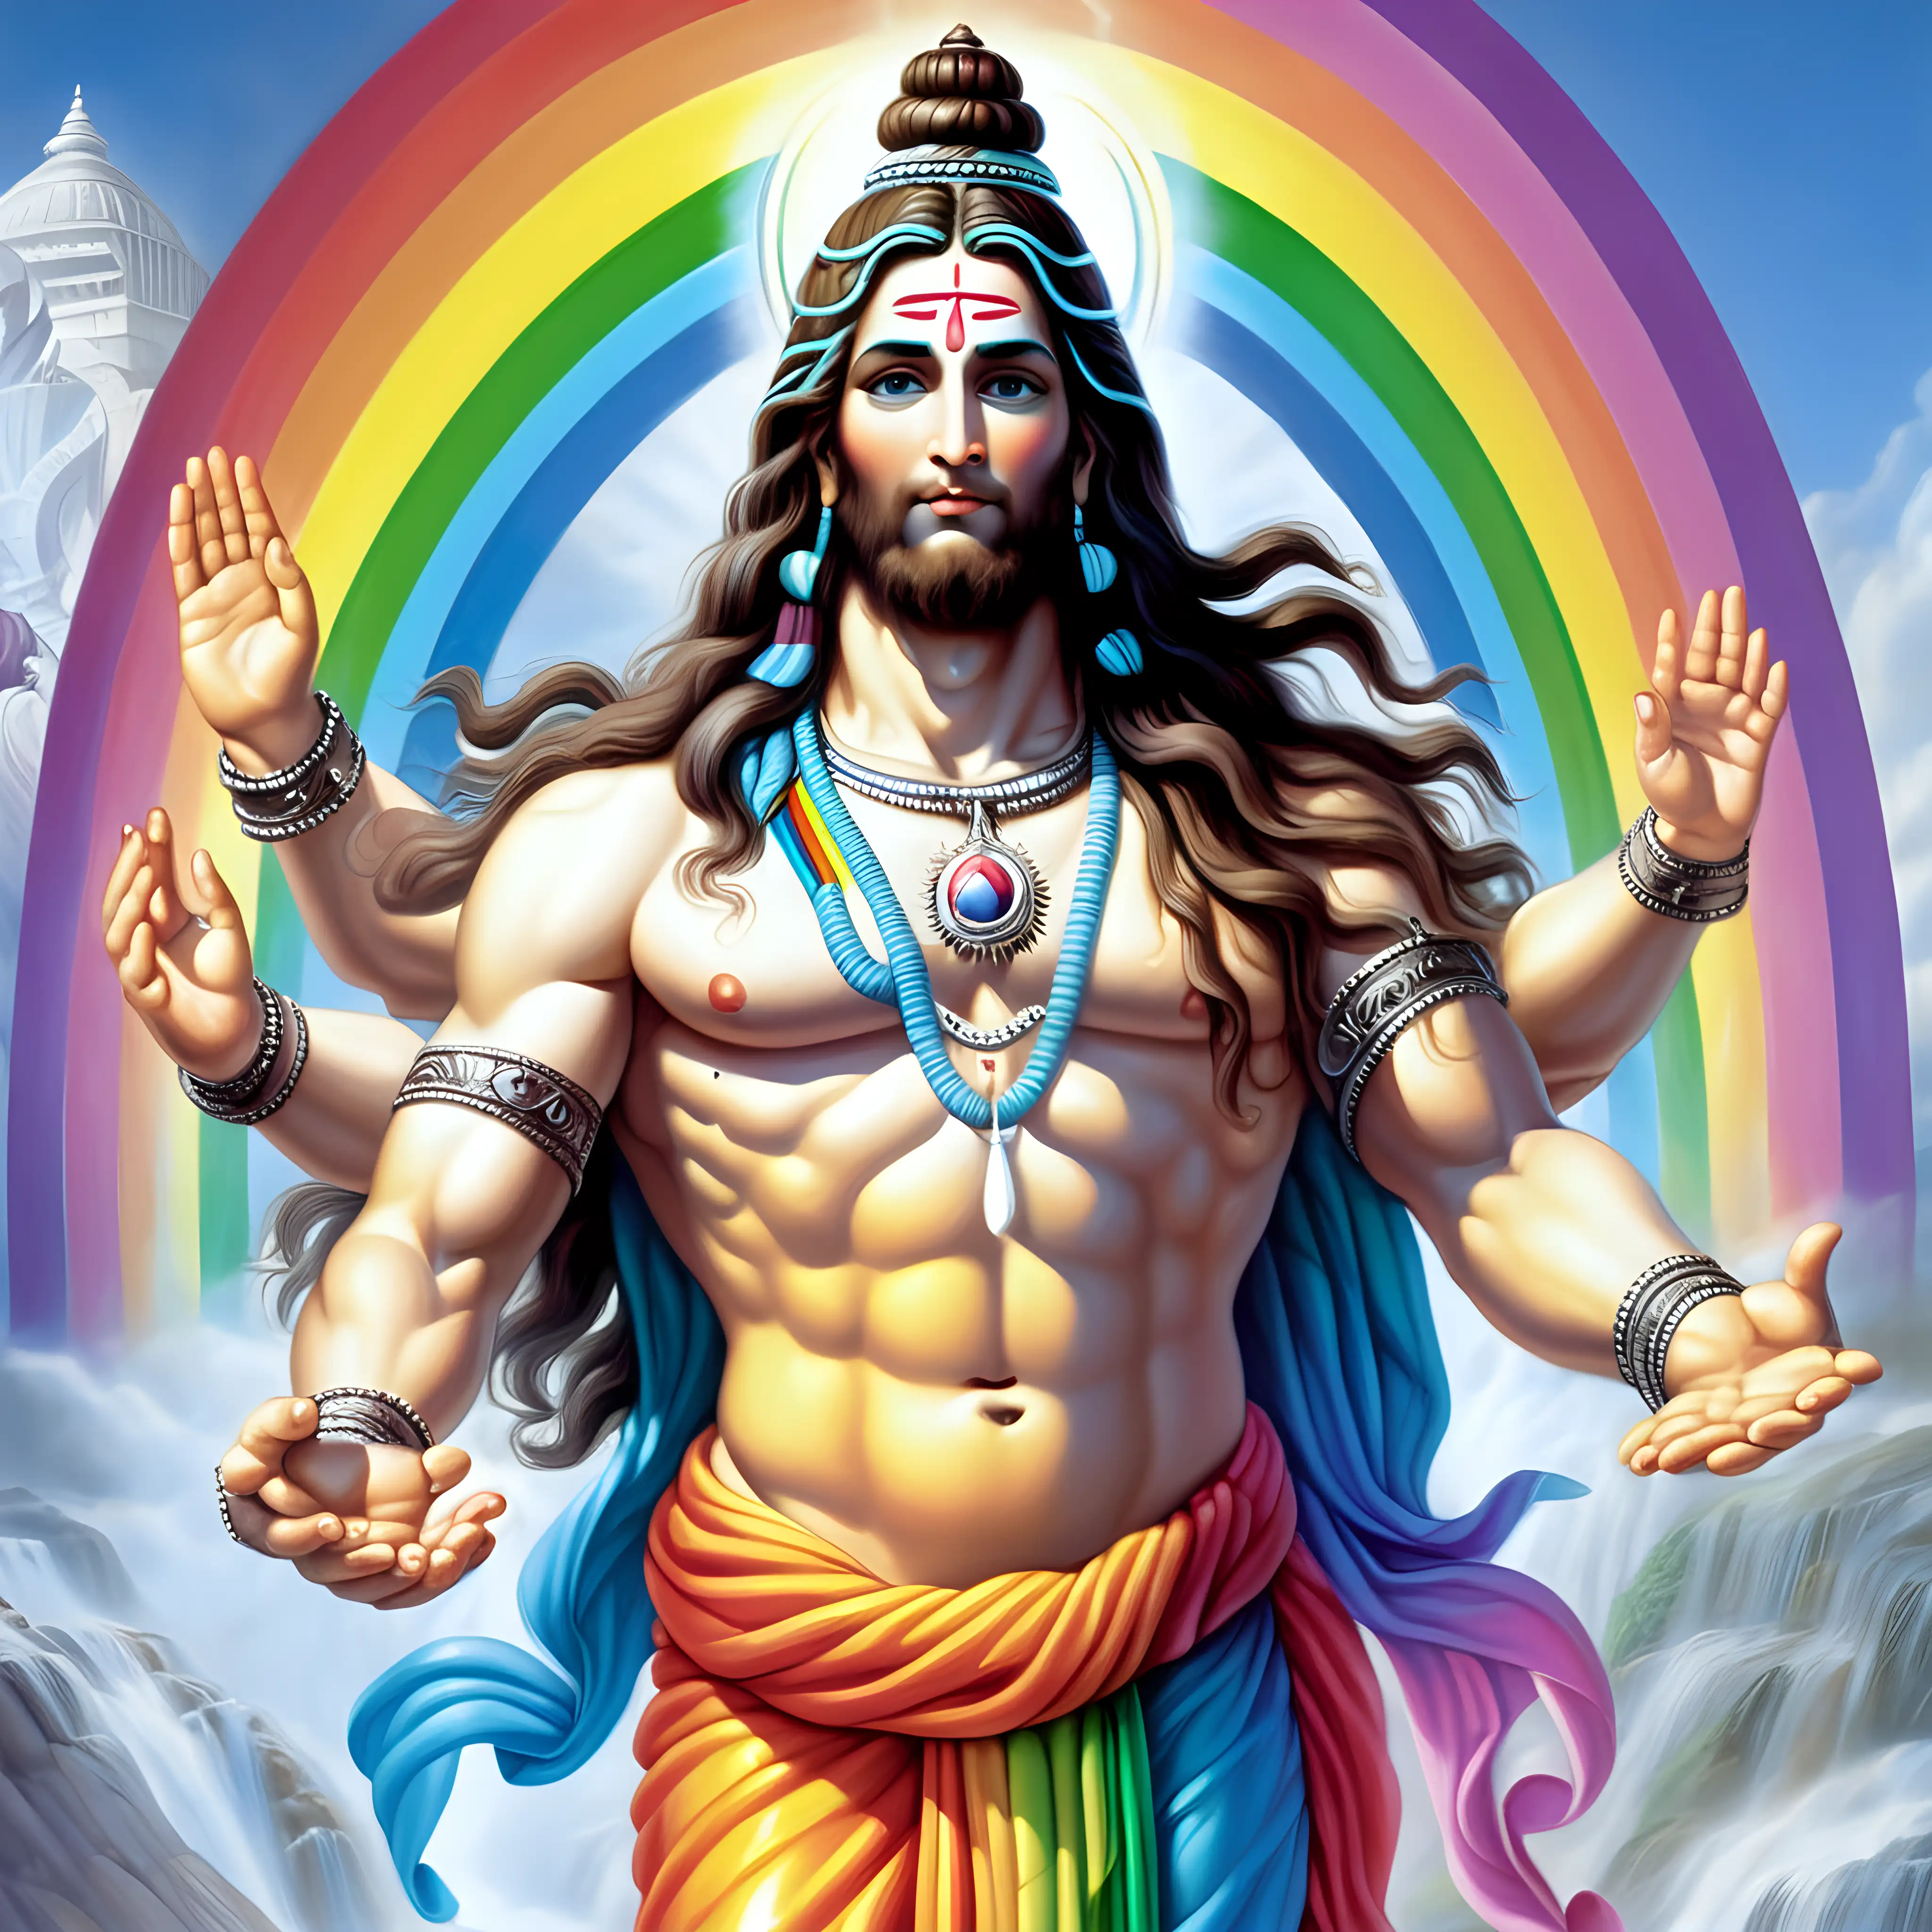 Divine Fusion Jesus and Lord Shiva Embracing Under a Radiant Rainbow